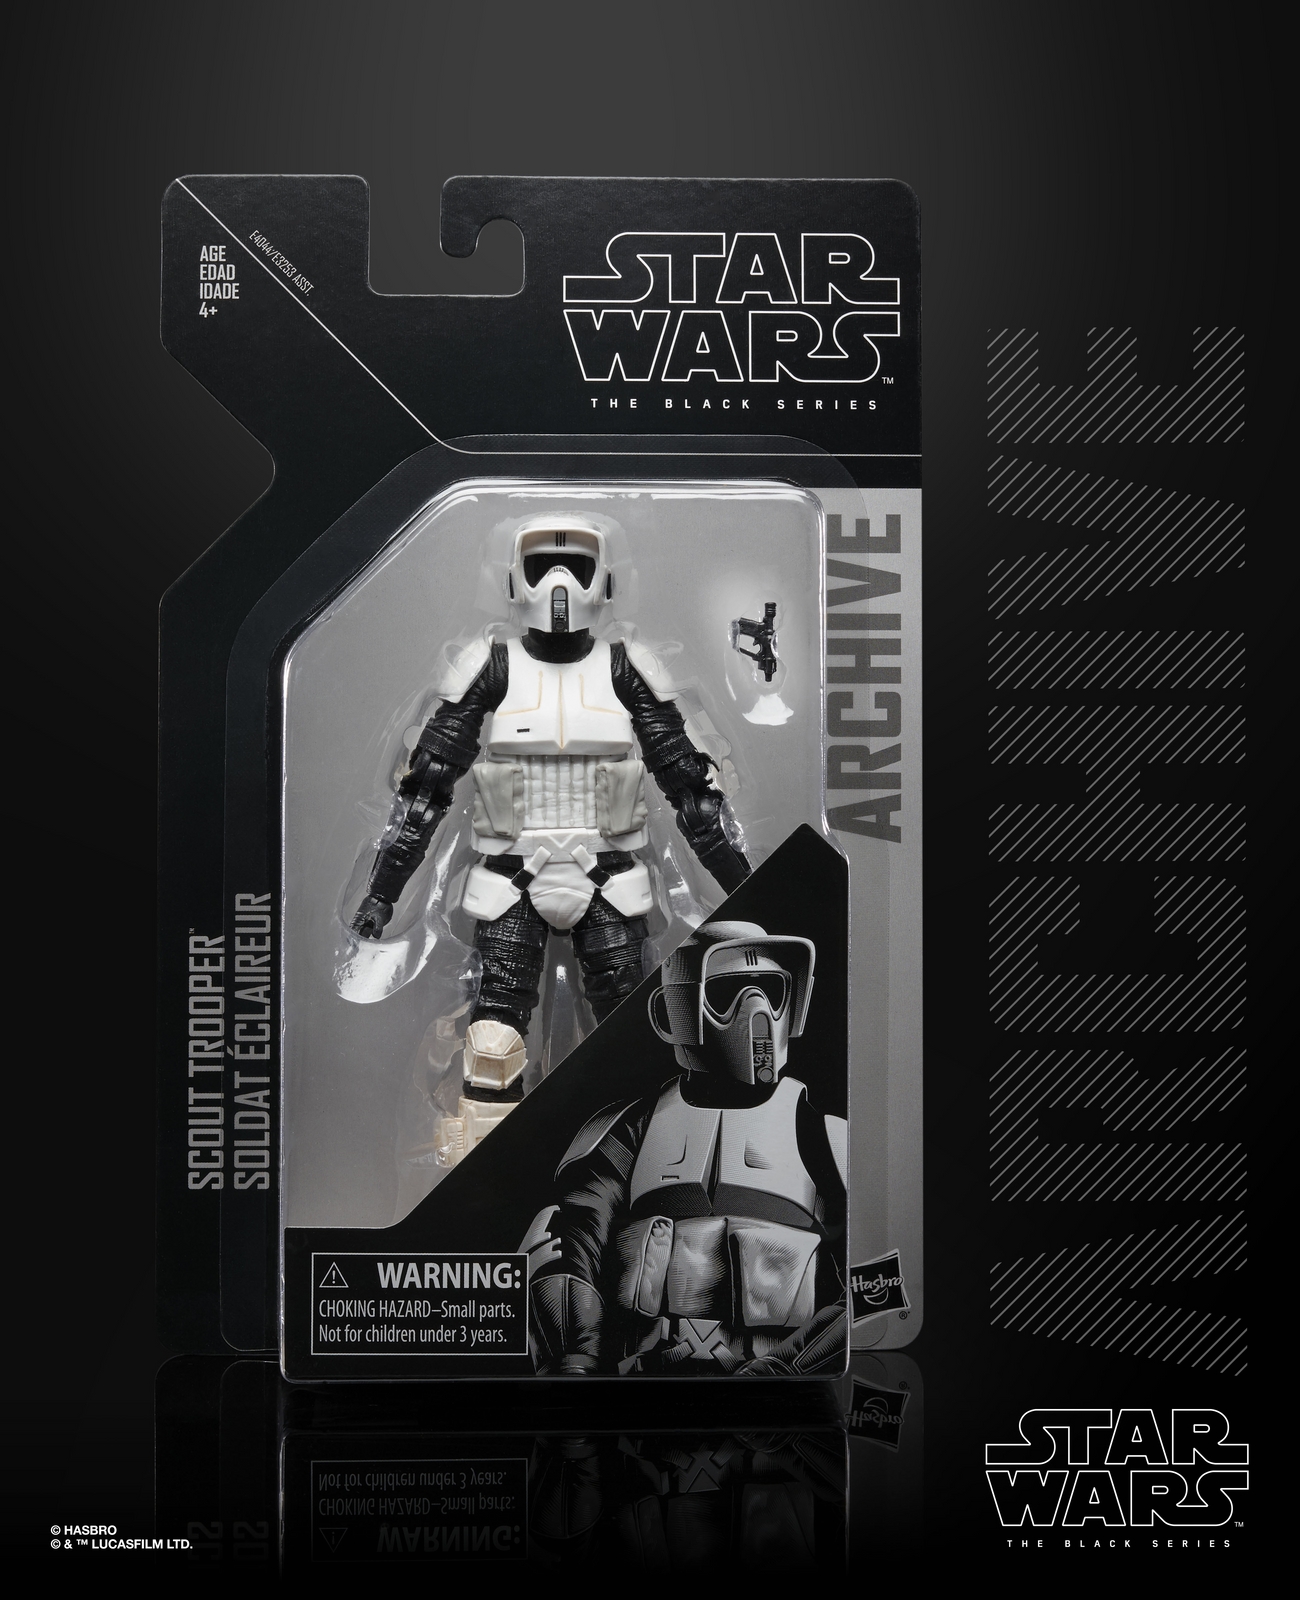 STAR WARS THE BLACK SERIES ARCHIVE 6-INCH Figure Assortment - Scout Trooper (in pck).jpg